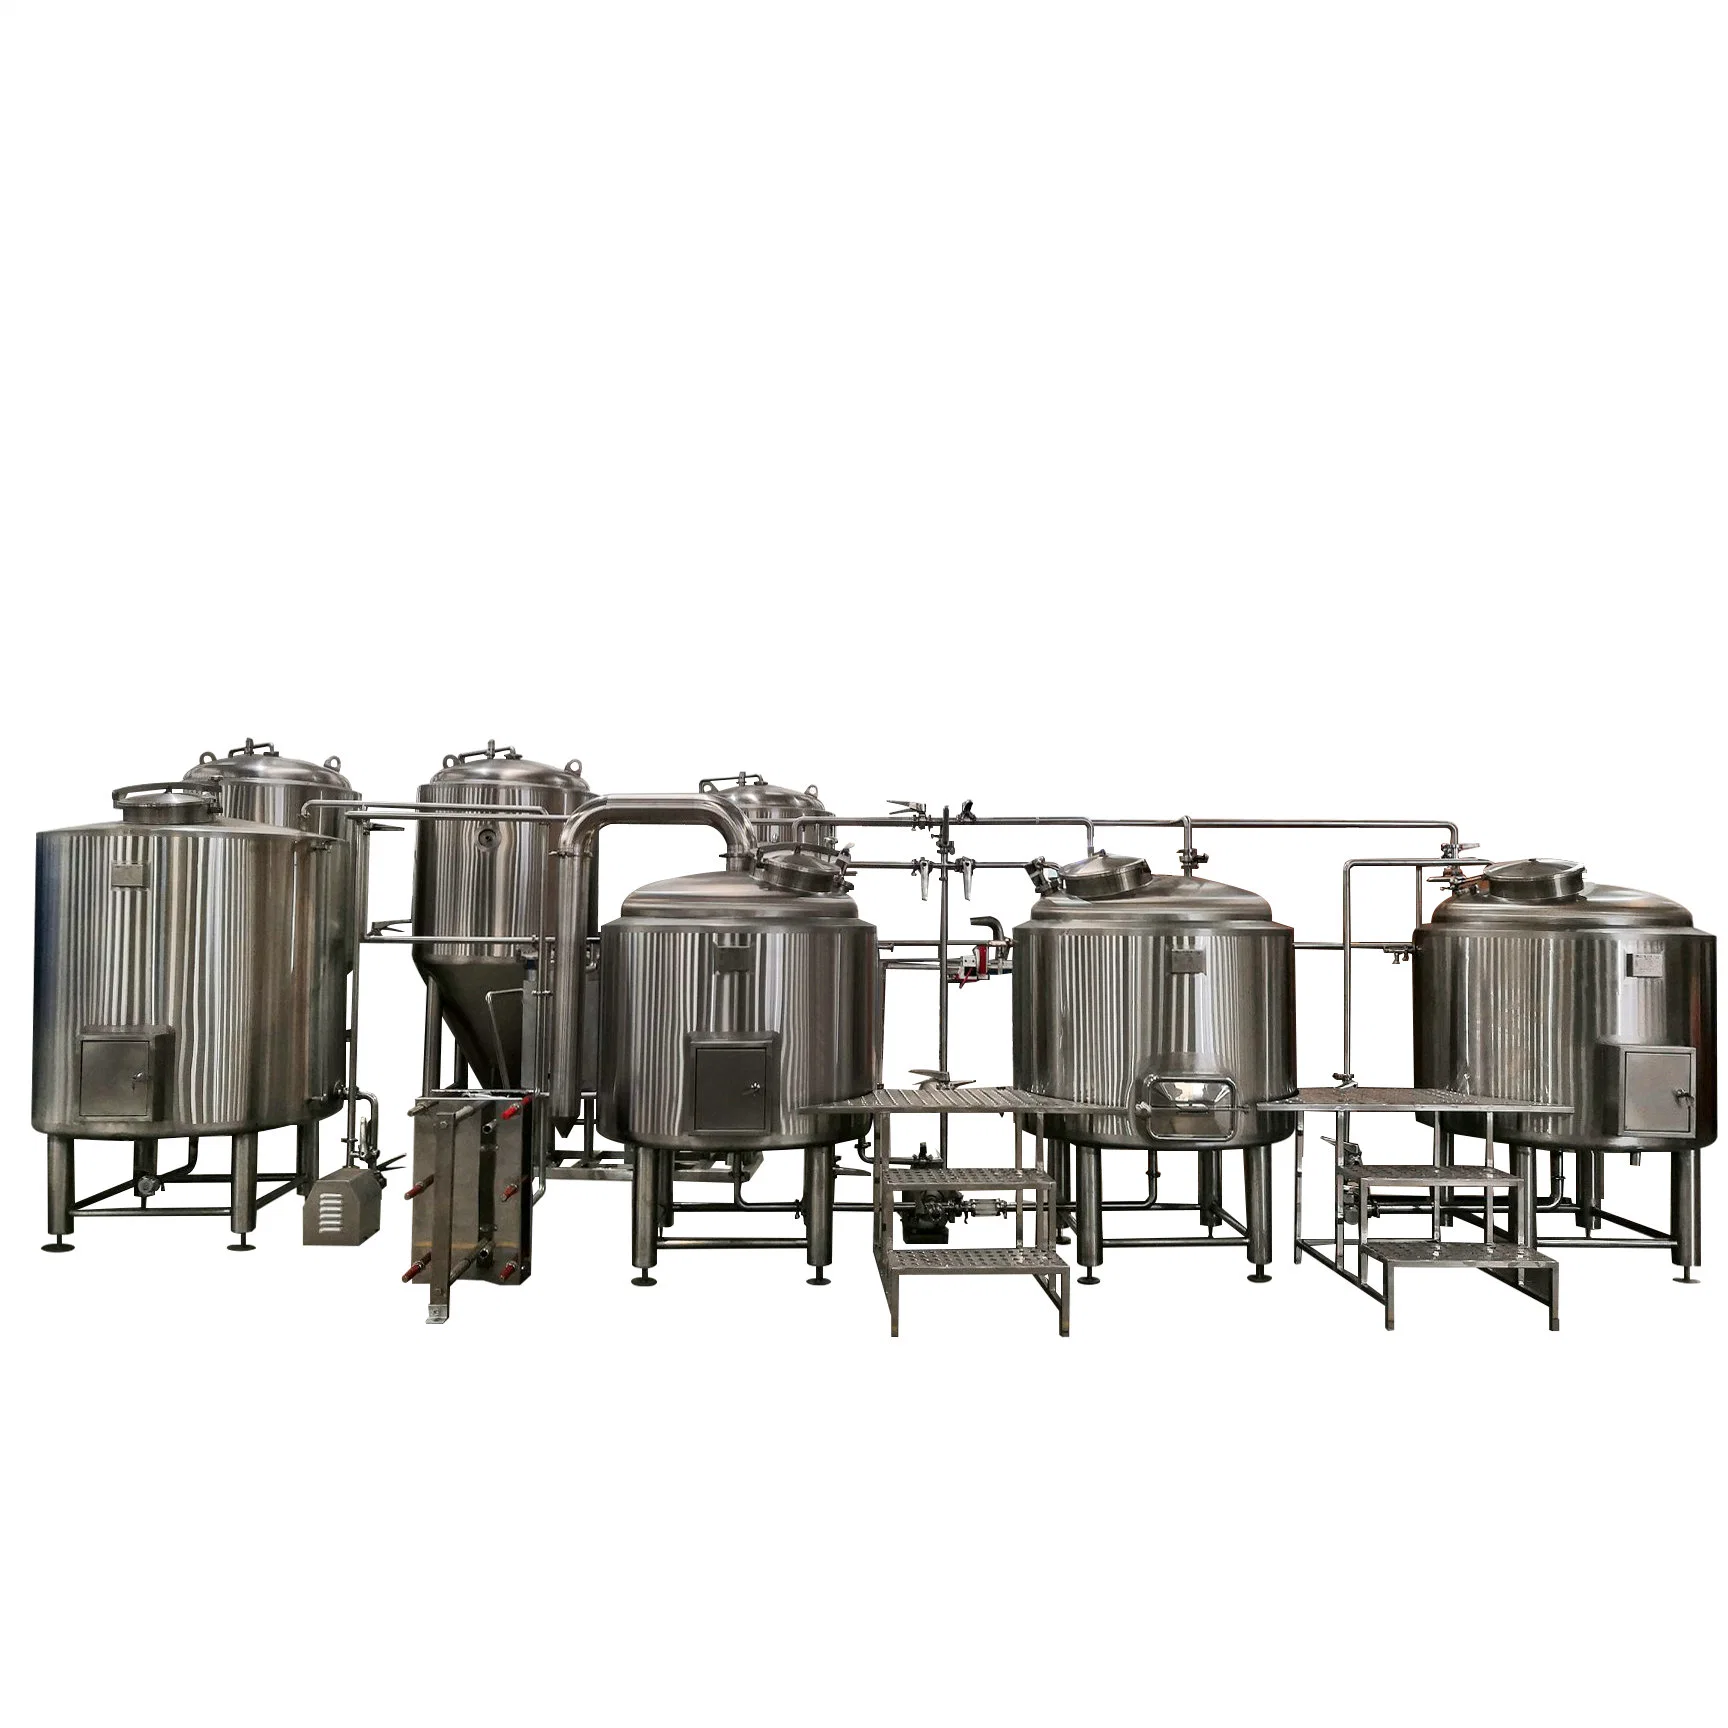 Cassman Micro Brewery Turnkey Beer Brewing Project 1000L